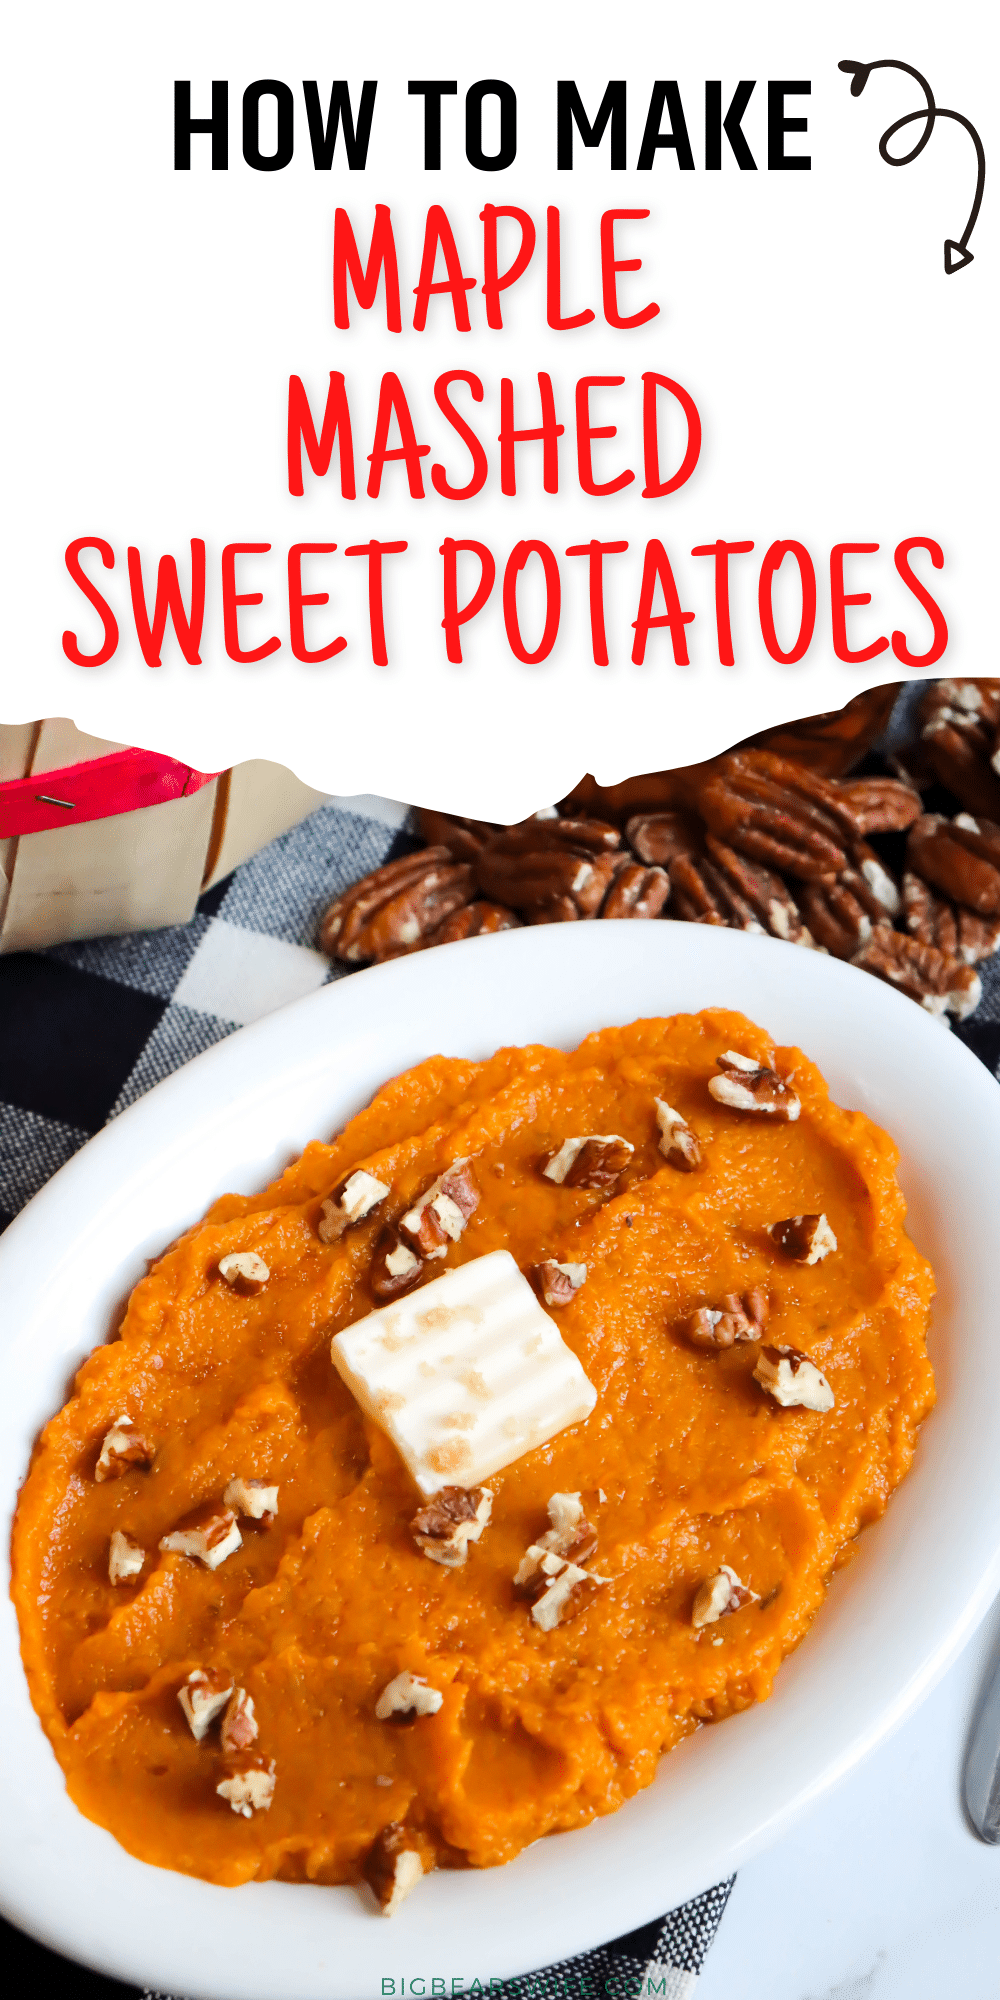 Maple Mashed Sweet Potatoes - roasted sweet potatoes mashed with butter, brown sugar and maple syrup.  via @bigbearswife